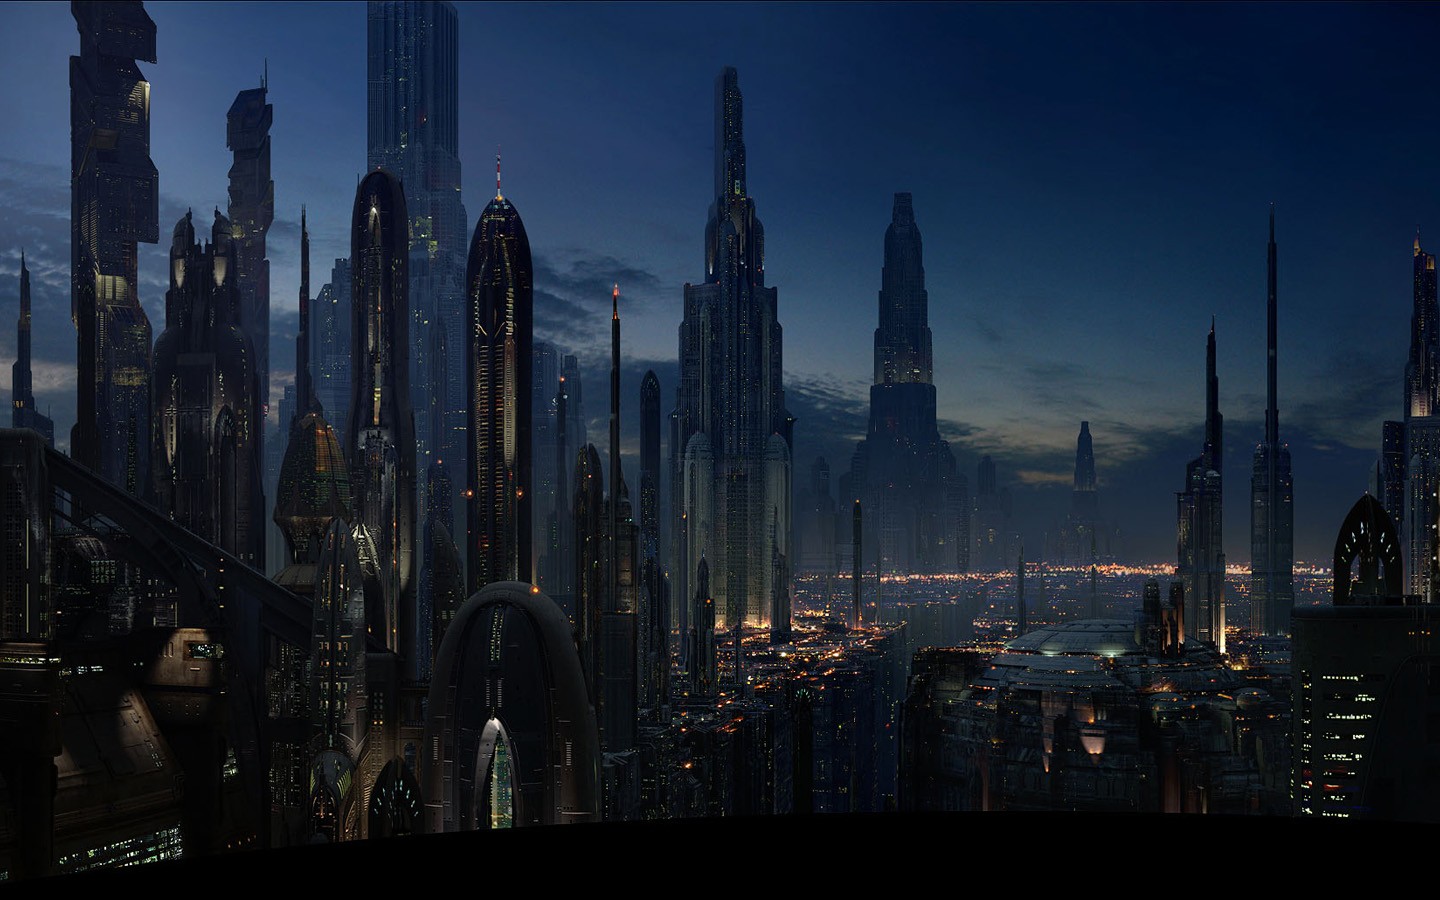 Star Wars Coruscant Star Wars Episode Iii The Revenge Of The Sith Movies Futuristic City Night Sky S 1440x900